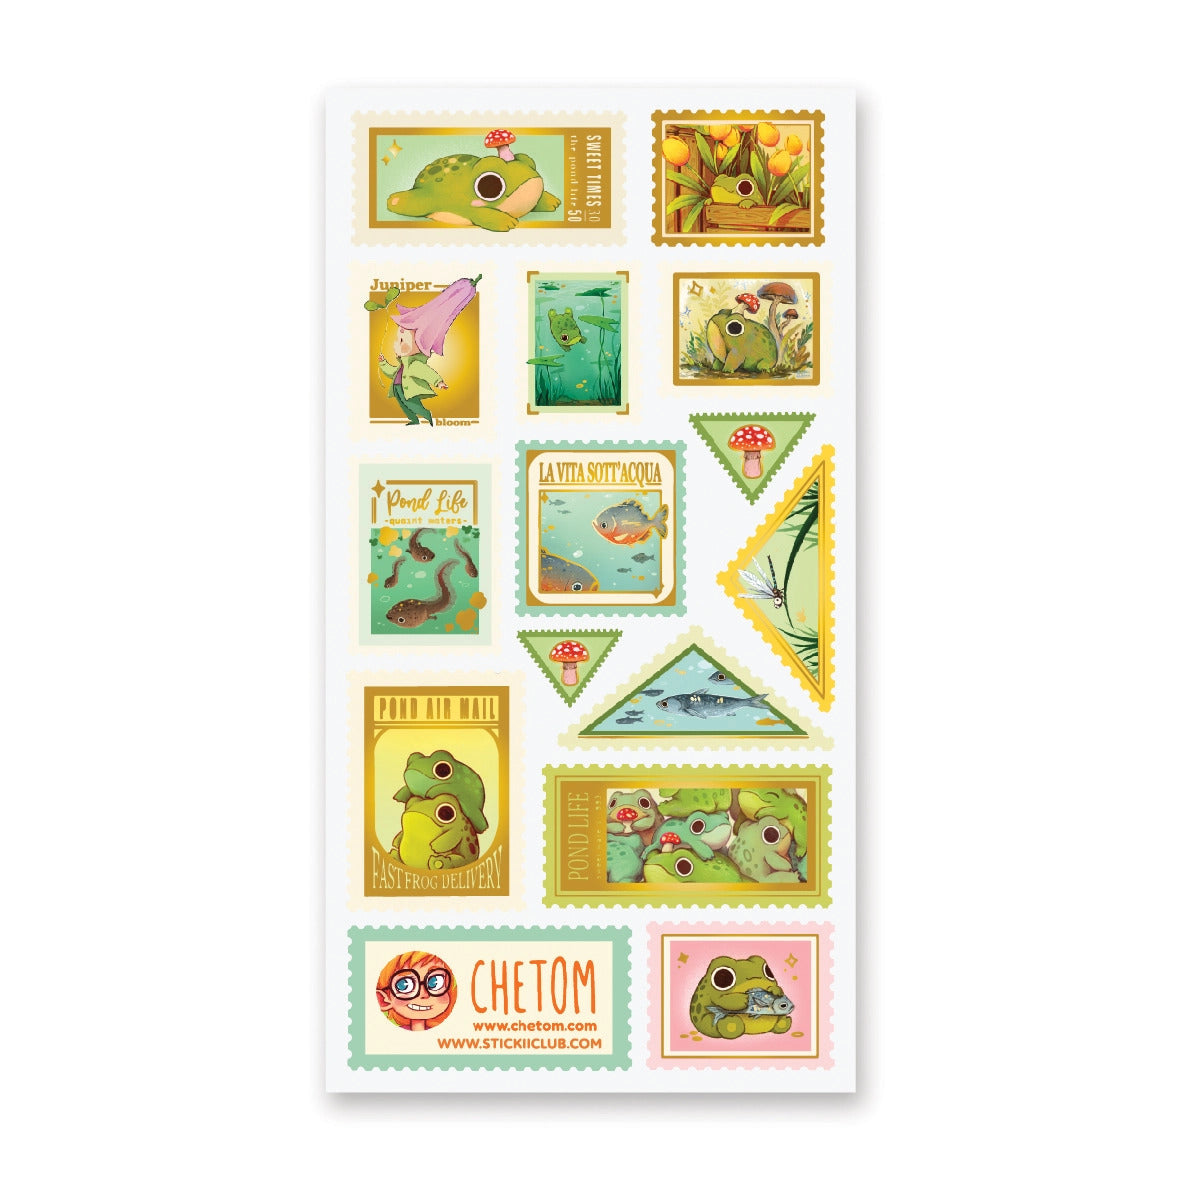 STICKII Sticker Sheet - The Pond Life Stamps